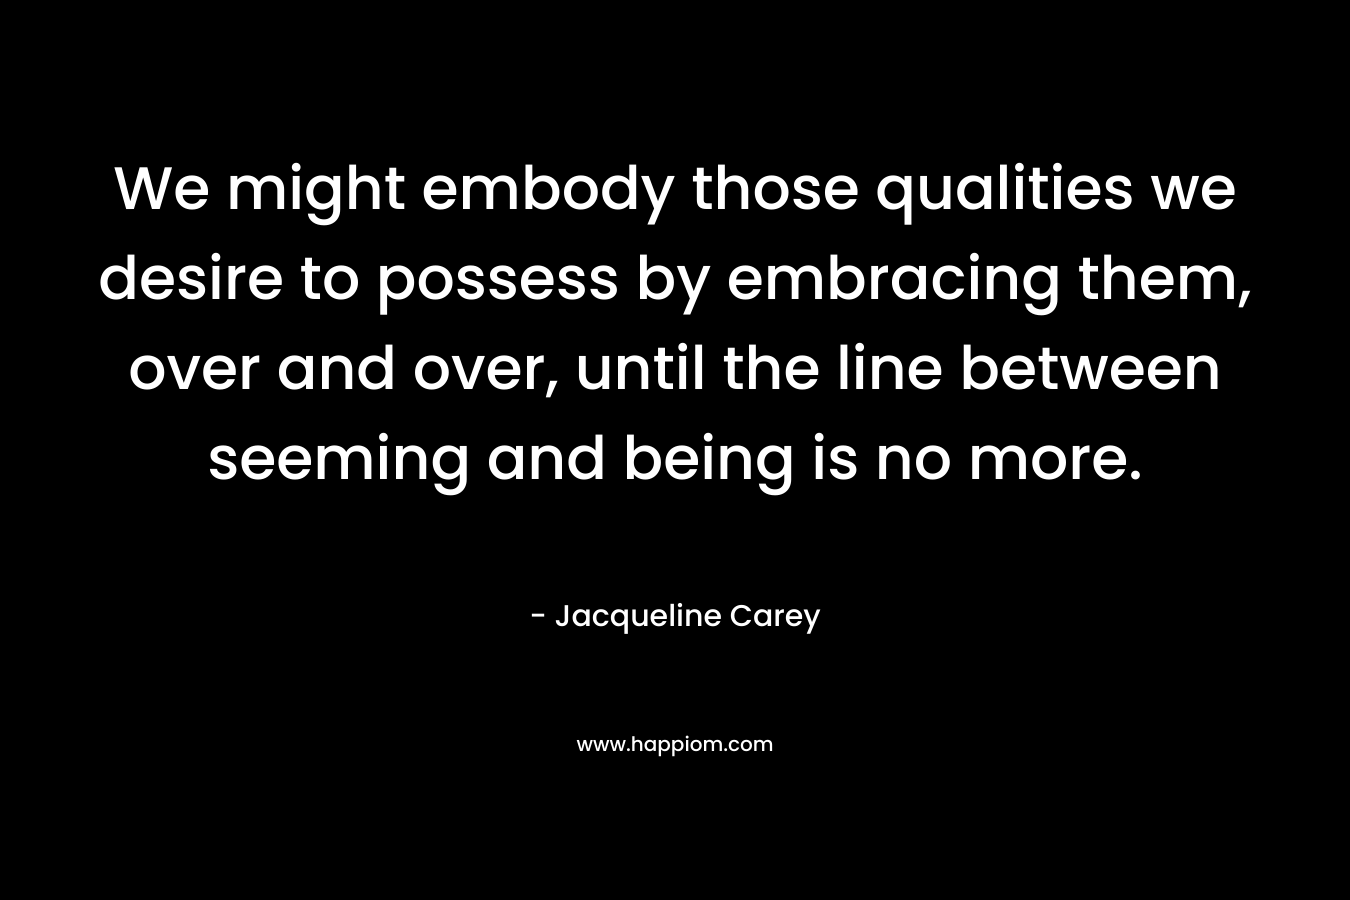 We might embody those qualities we desire to possess by embracing them, over and over, until the line between seeming and being is no more. – Jacqueline Carey